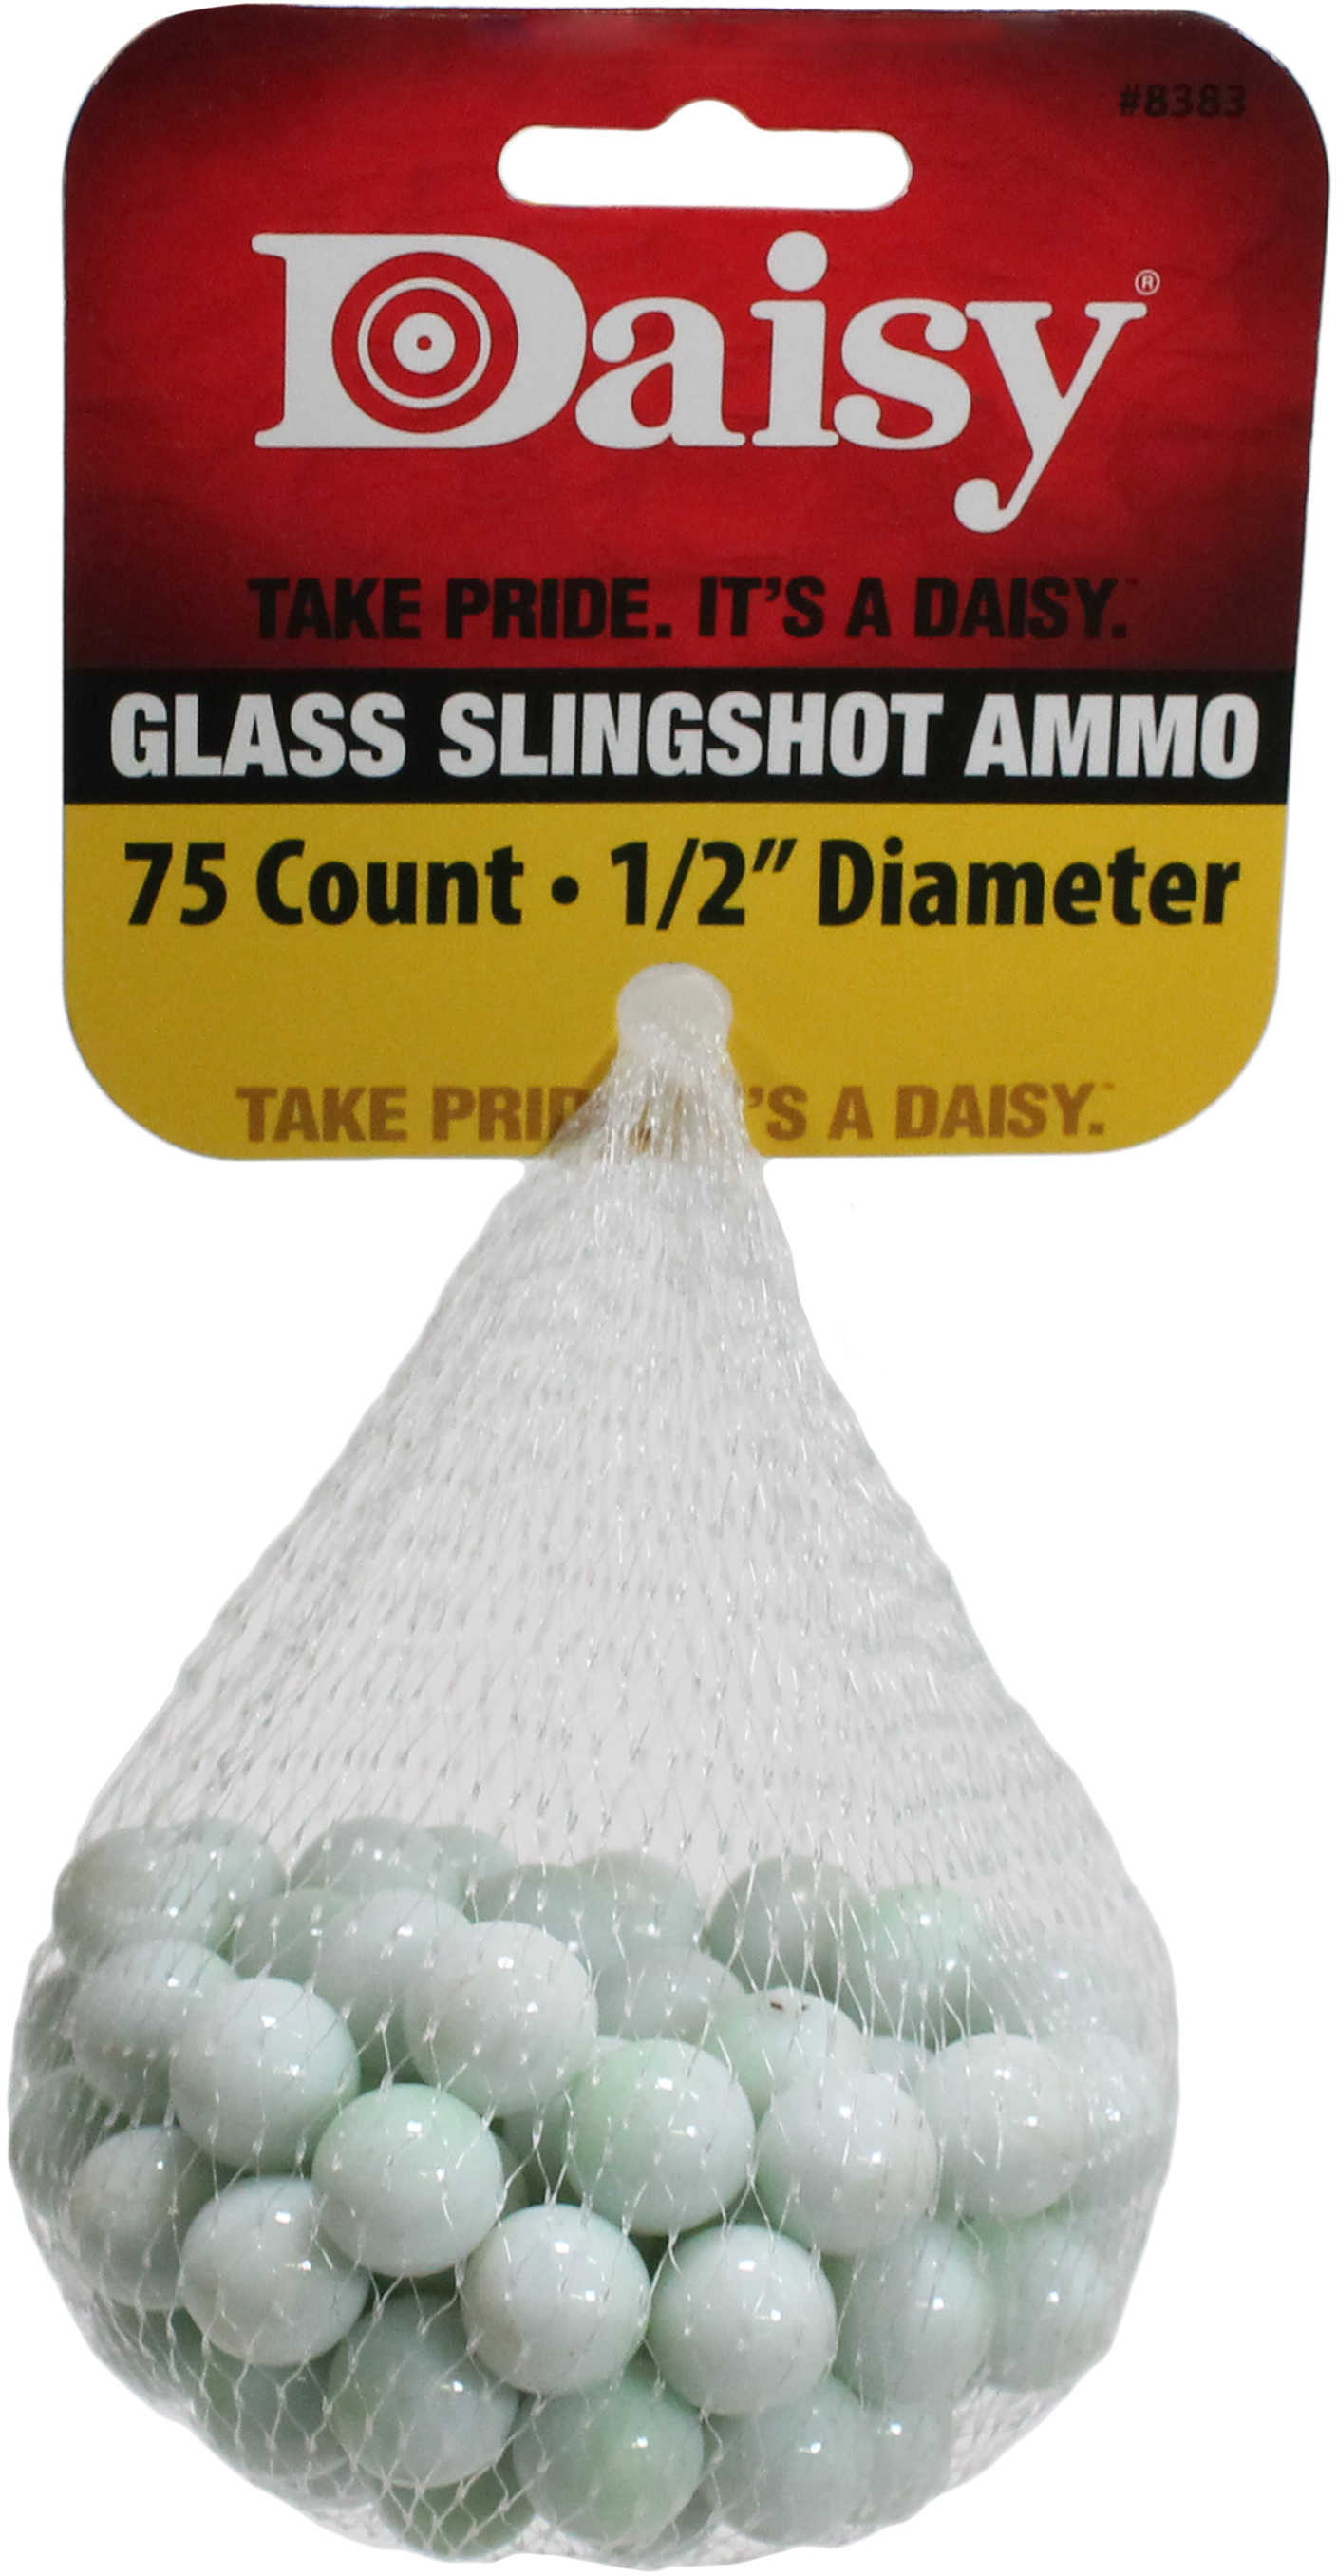 Daisy Outdoor Products Slingshot Ammo Glass 75Pk